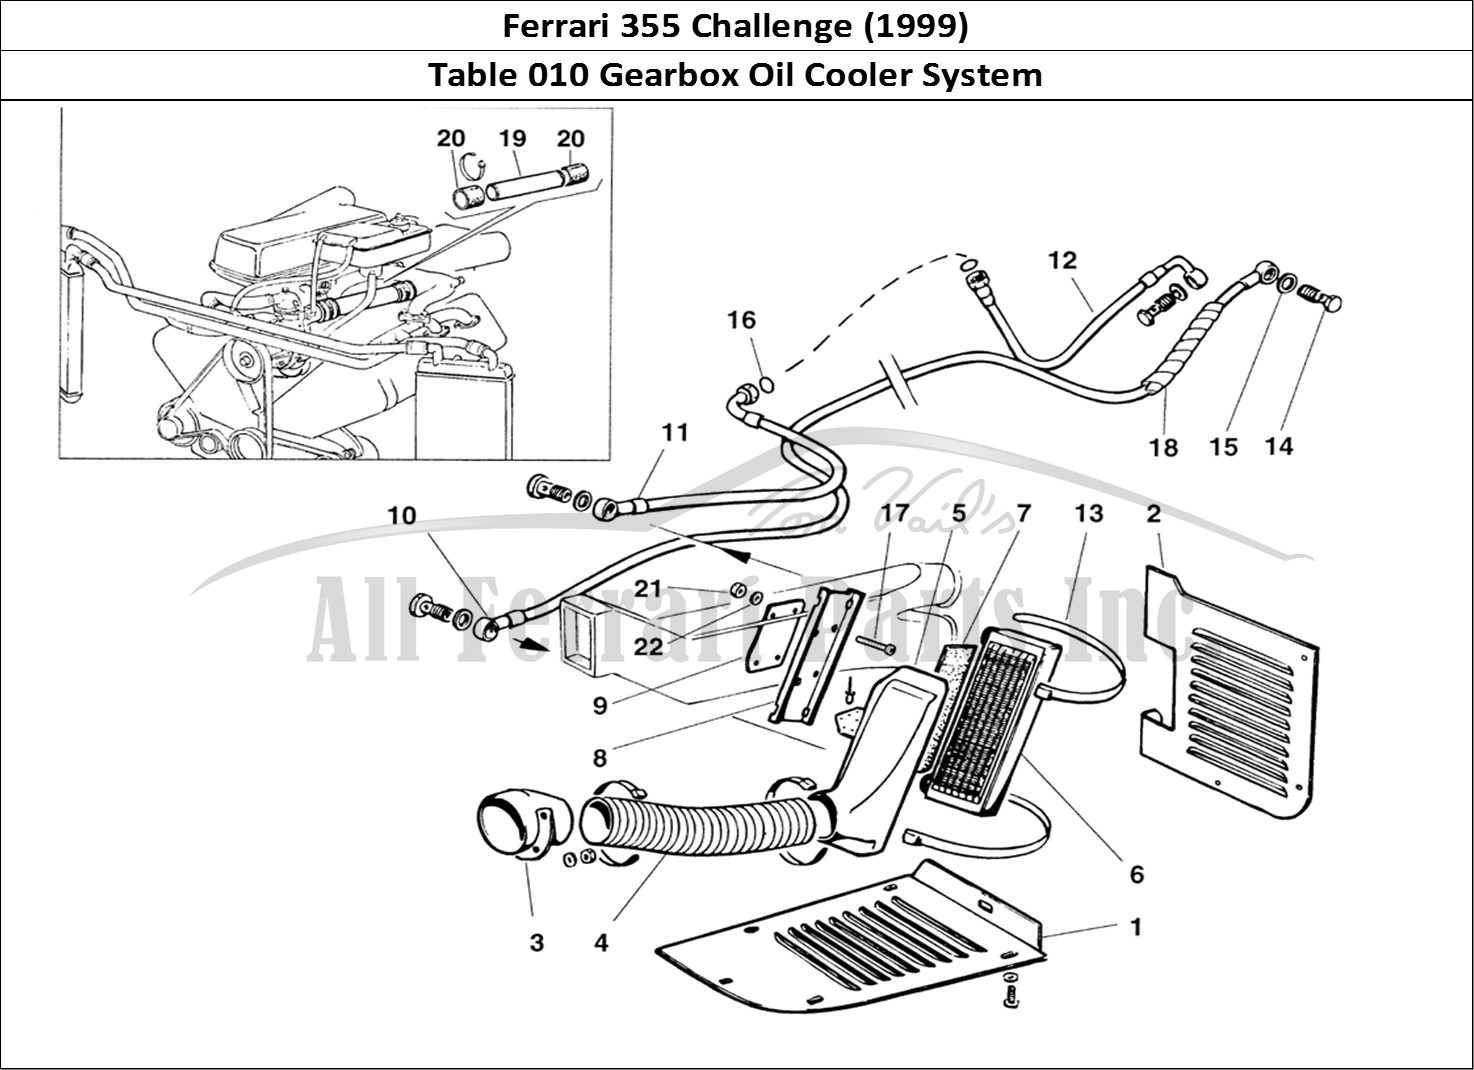 Ferrari Parts Ferrari 355 Challenge (1999) Page 010 Gearbox Oil Cooling Syste